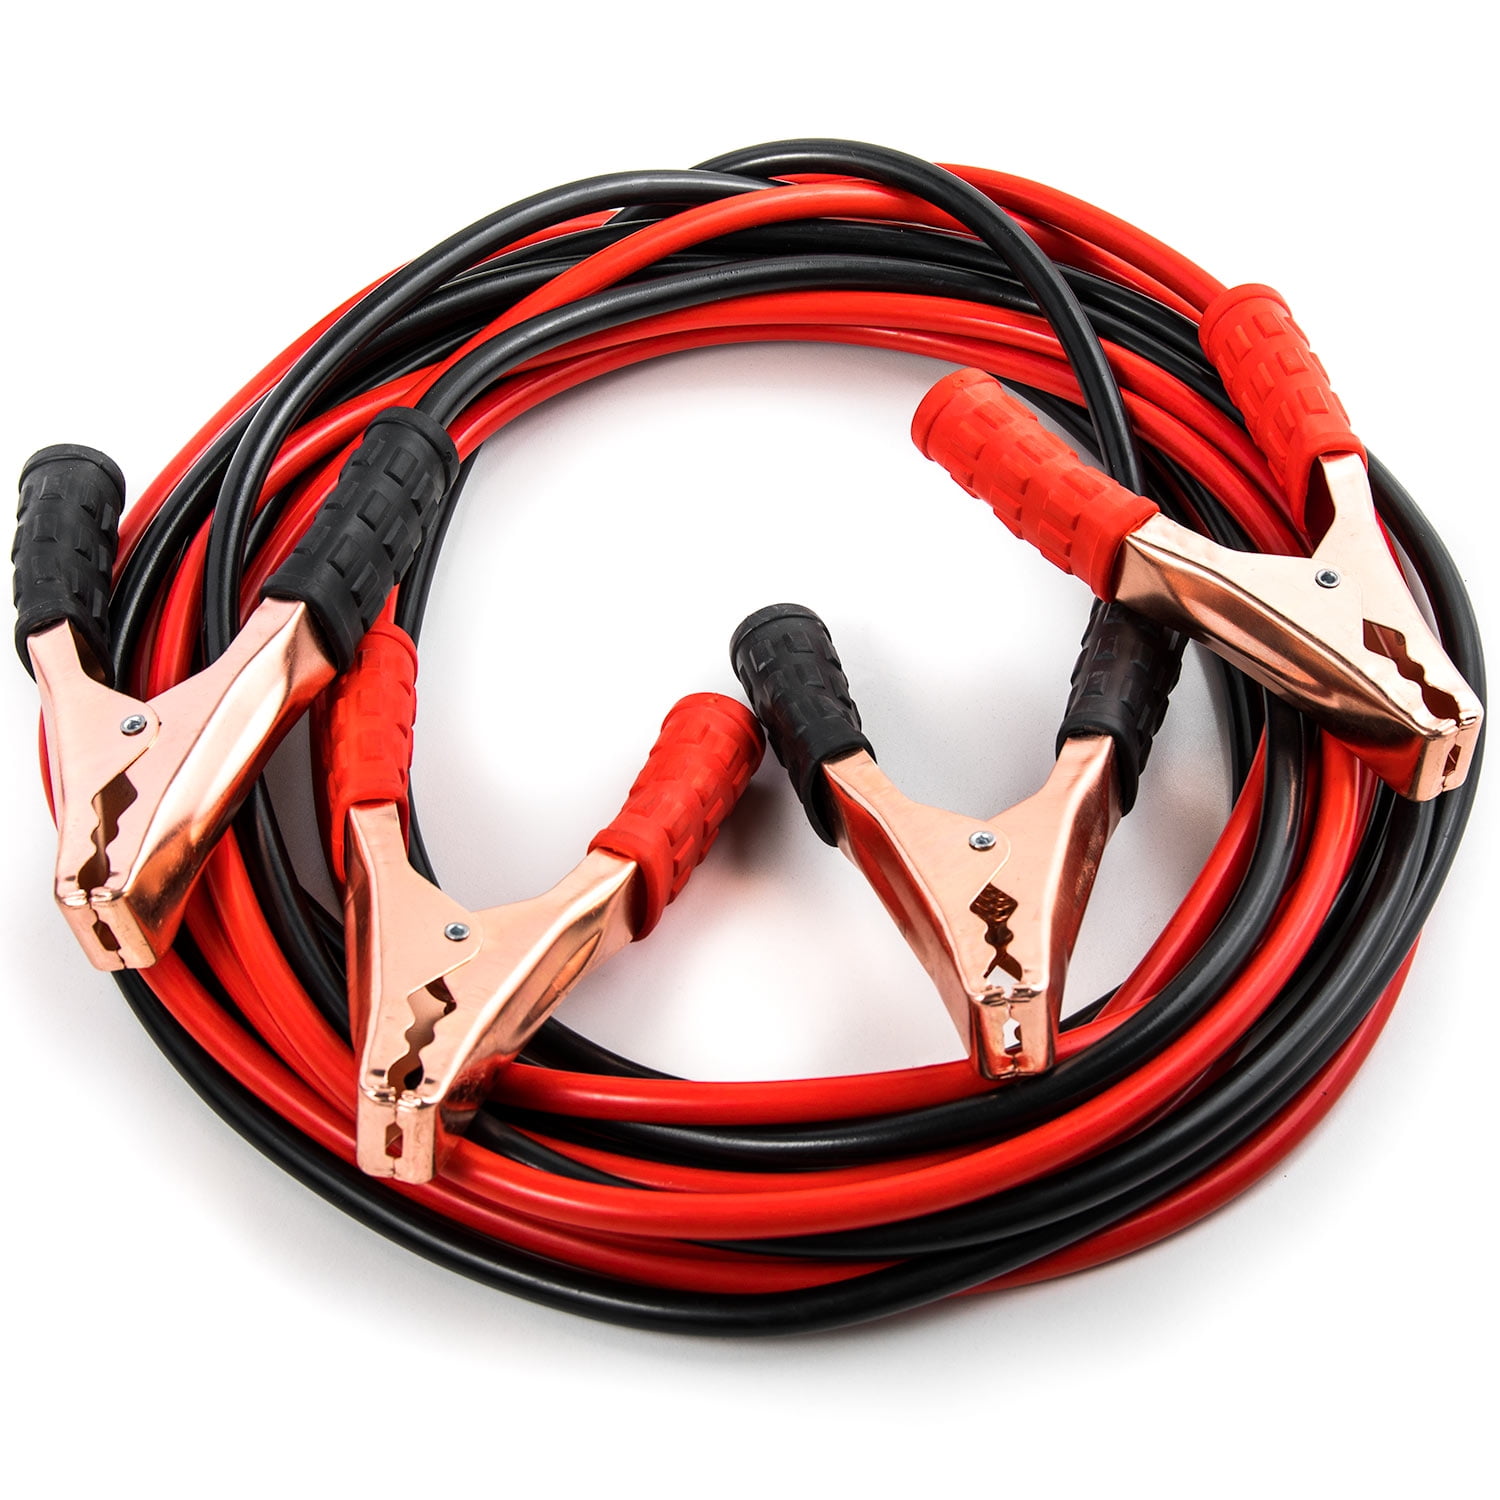 4 AWG x 20 Feet EPAuto 4 Gauge x 20 Ft 500A Heavy Duty Booster Jumper Cables with Travel Bag and Safety Gloves 